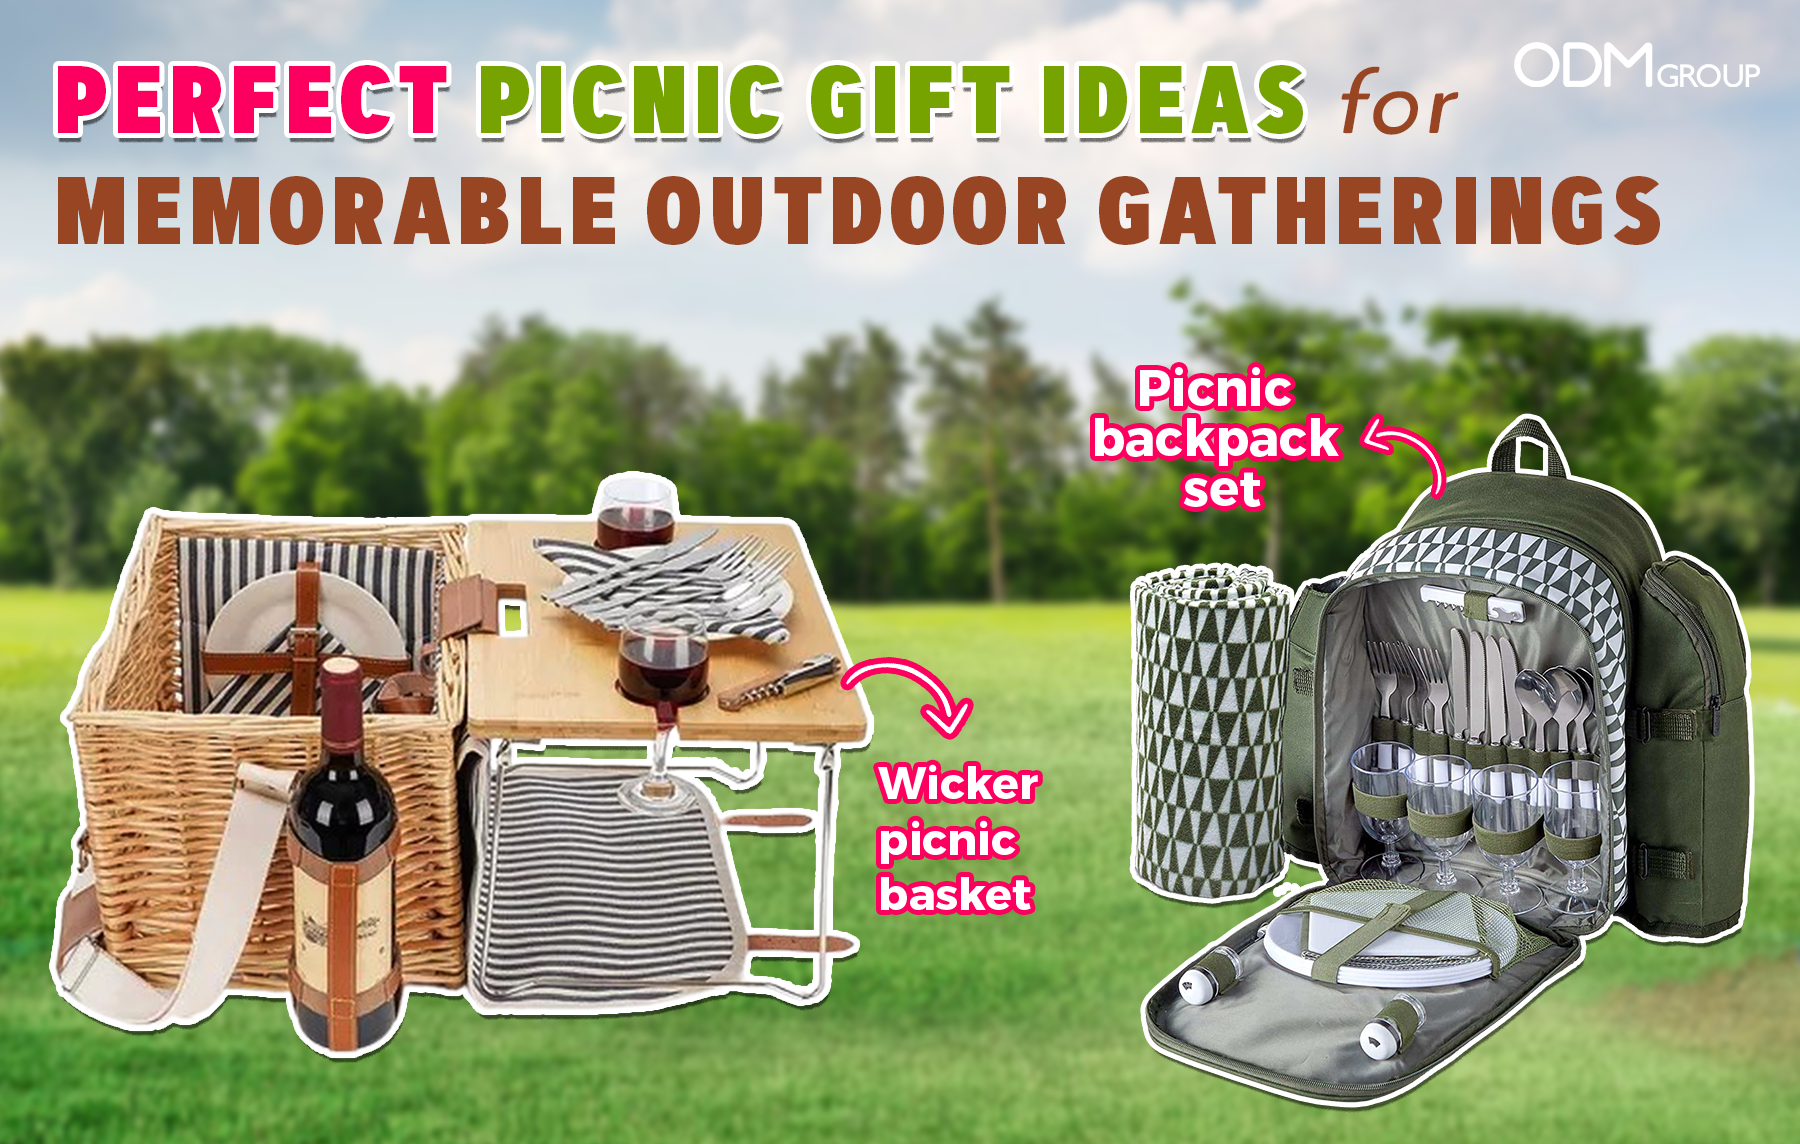 Picnic gift Ideas for Employee Appreciation Day including a wicker basket and a backpack set